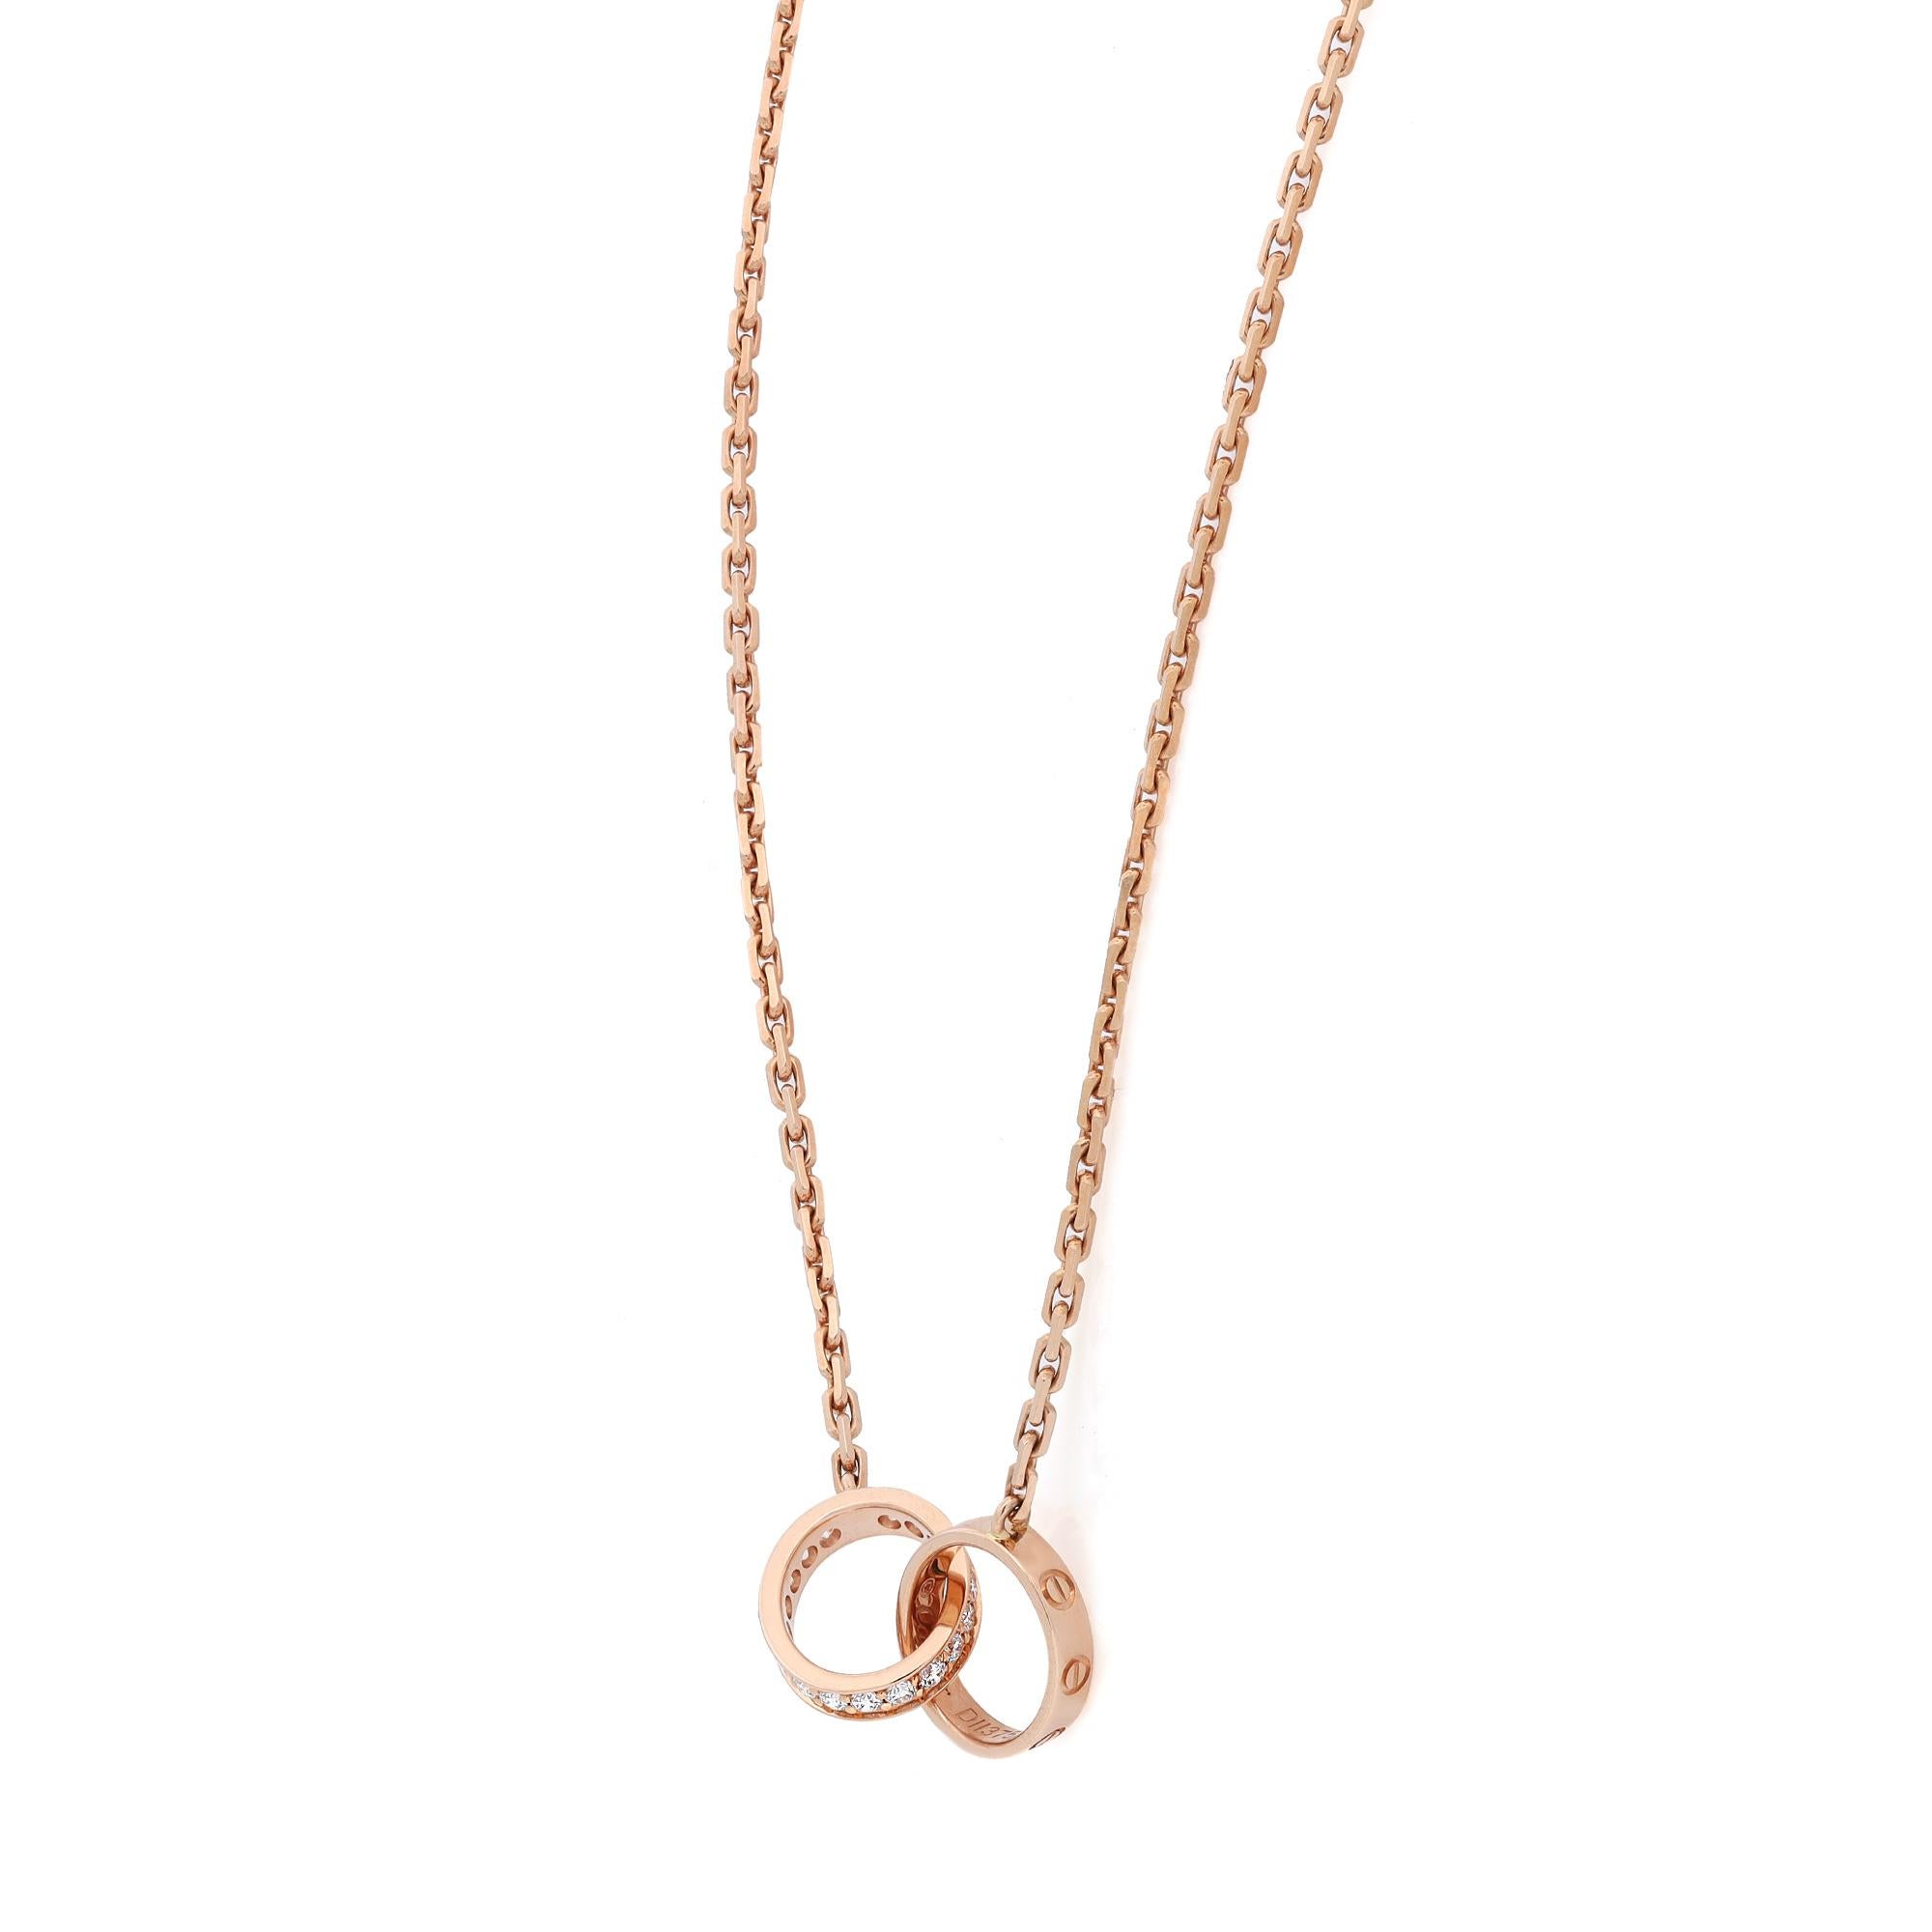 Cartier Love diamond necklace, crafted in 18K rose gold. This stunning necklace is accentuated by 18 round brilliant cut diamonds weighing 0.22 carat. Width: 2.65 mm. Inner diameter: 7.6 mm. Chain length: 16.5 inches. Total weight: 7.30 grams.